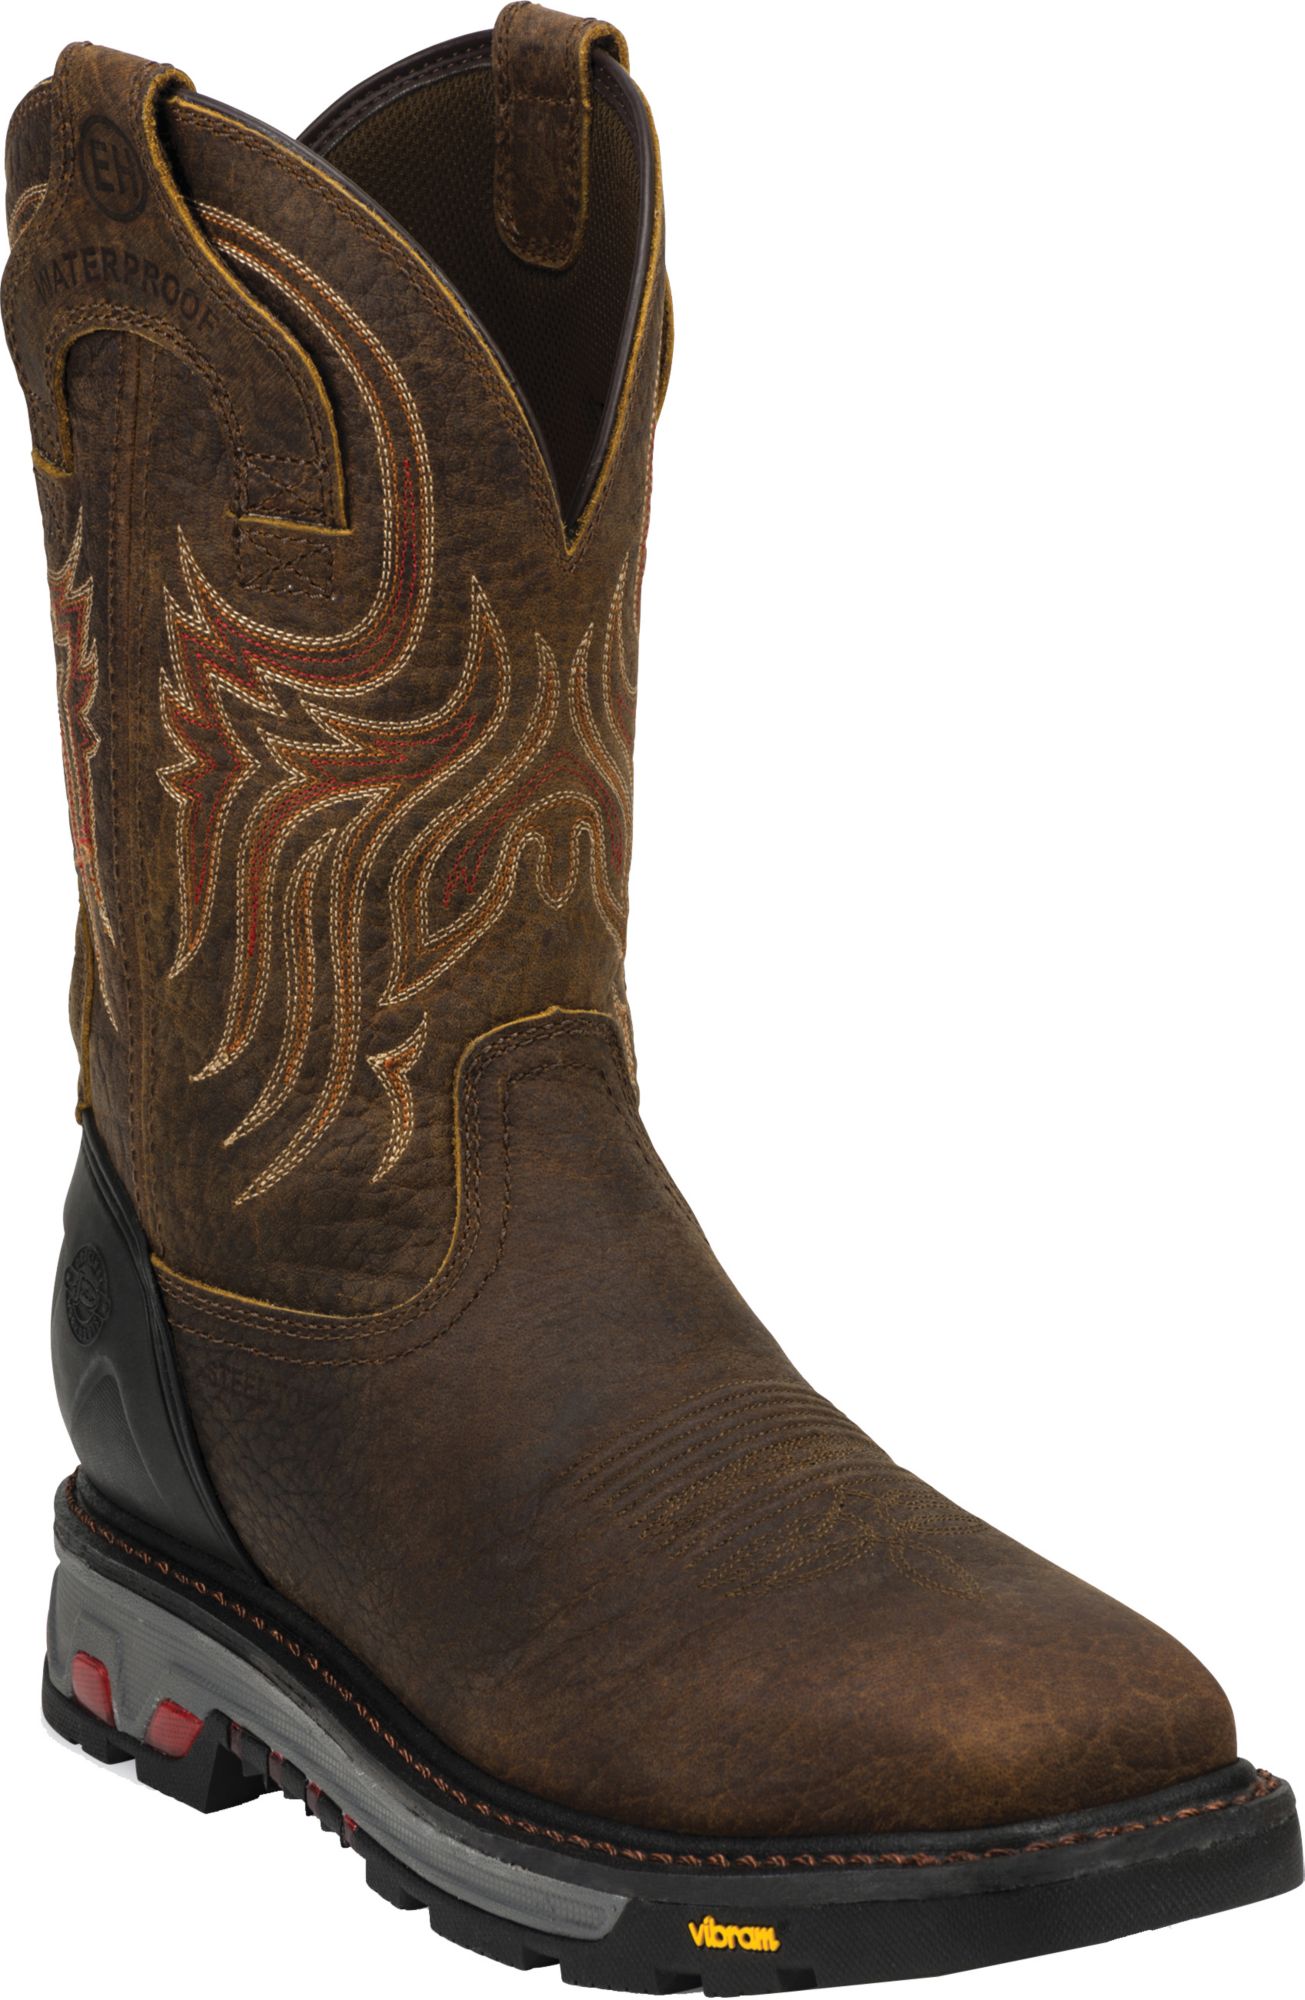 justin boots square steel toe